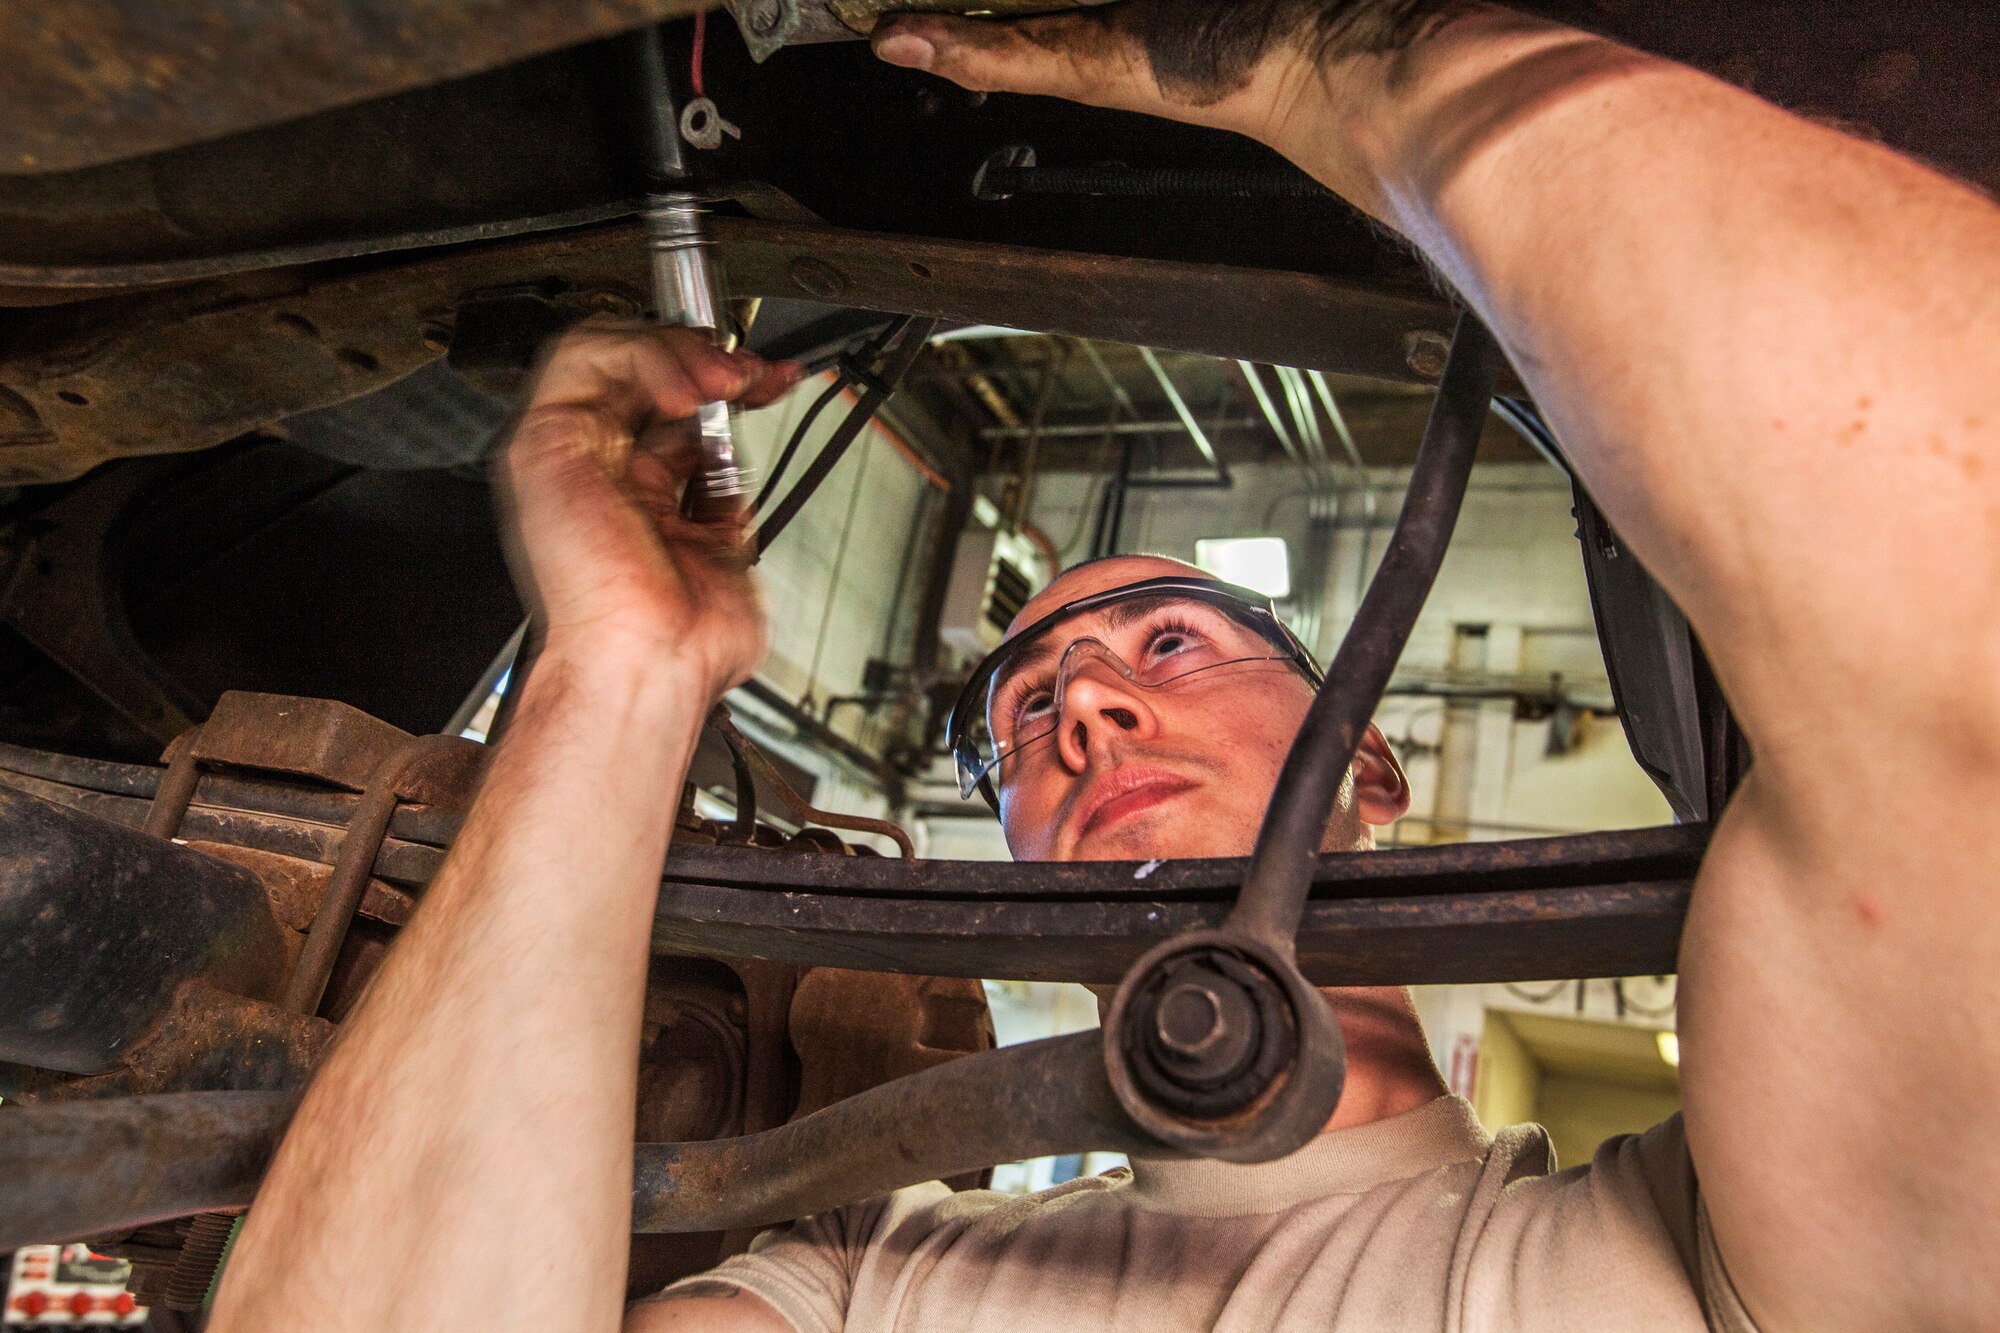 Senior Airman Keith Miller, replaces a starter on a six-passenger pickup truck at the 108th Wing Vehicle Maintenance Shop, New Jersey Air National Guard, Joint Base McGuire-Dix-Lakehurst, N.J., Jan. 11, 2015. (U.S. Air National Guard photo by Master Sgt. Mark C. Olsen/Released)